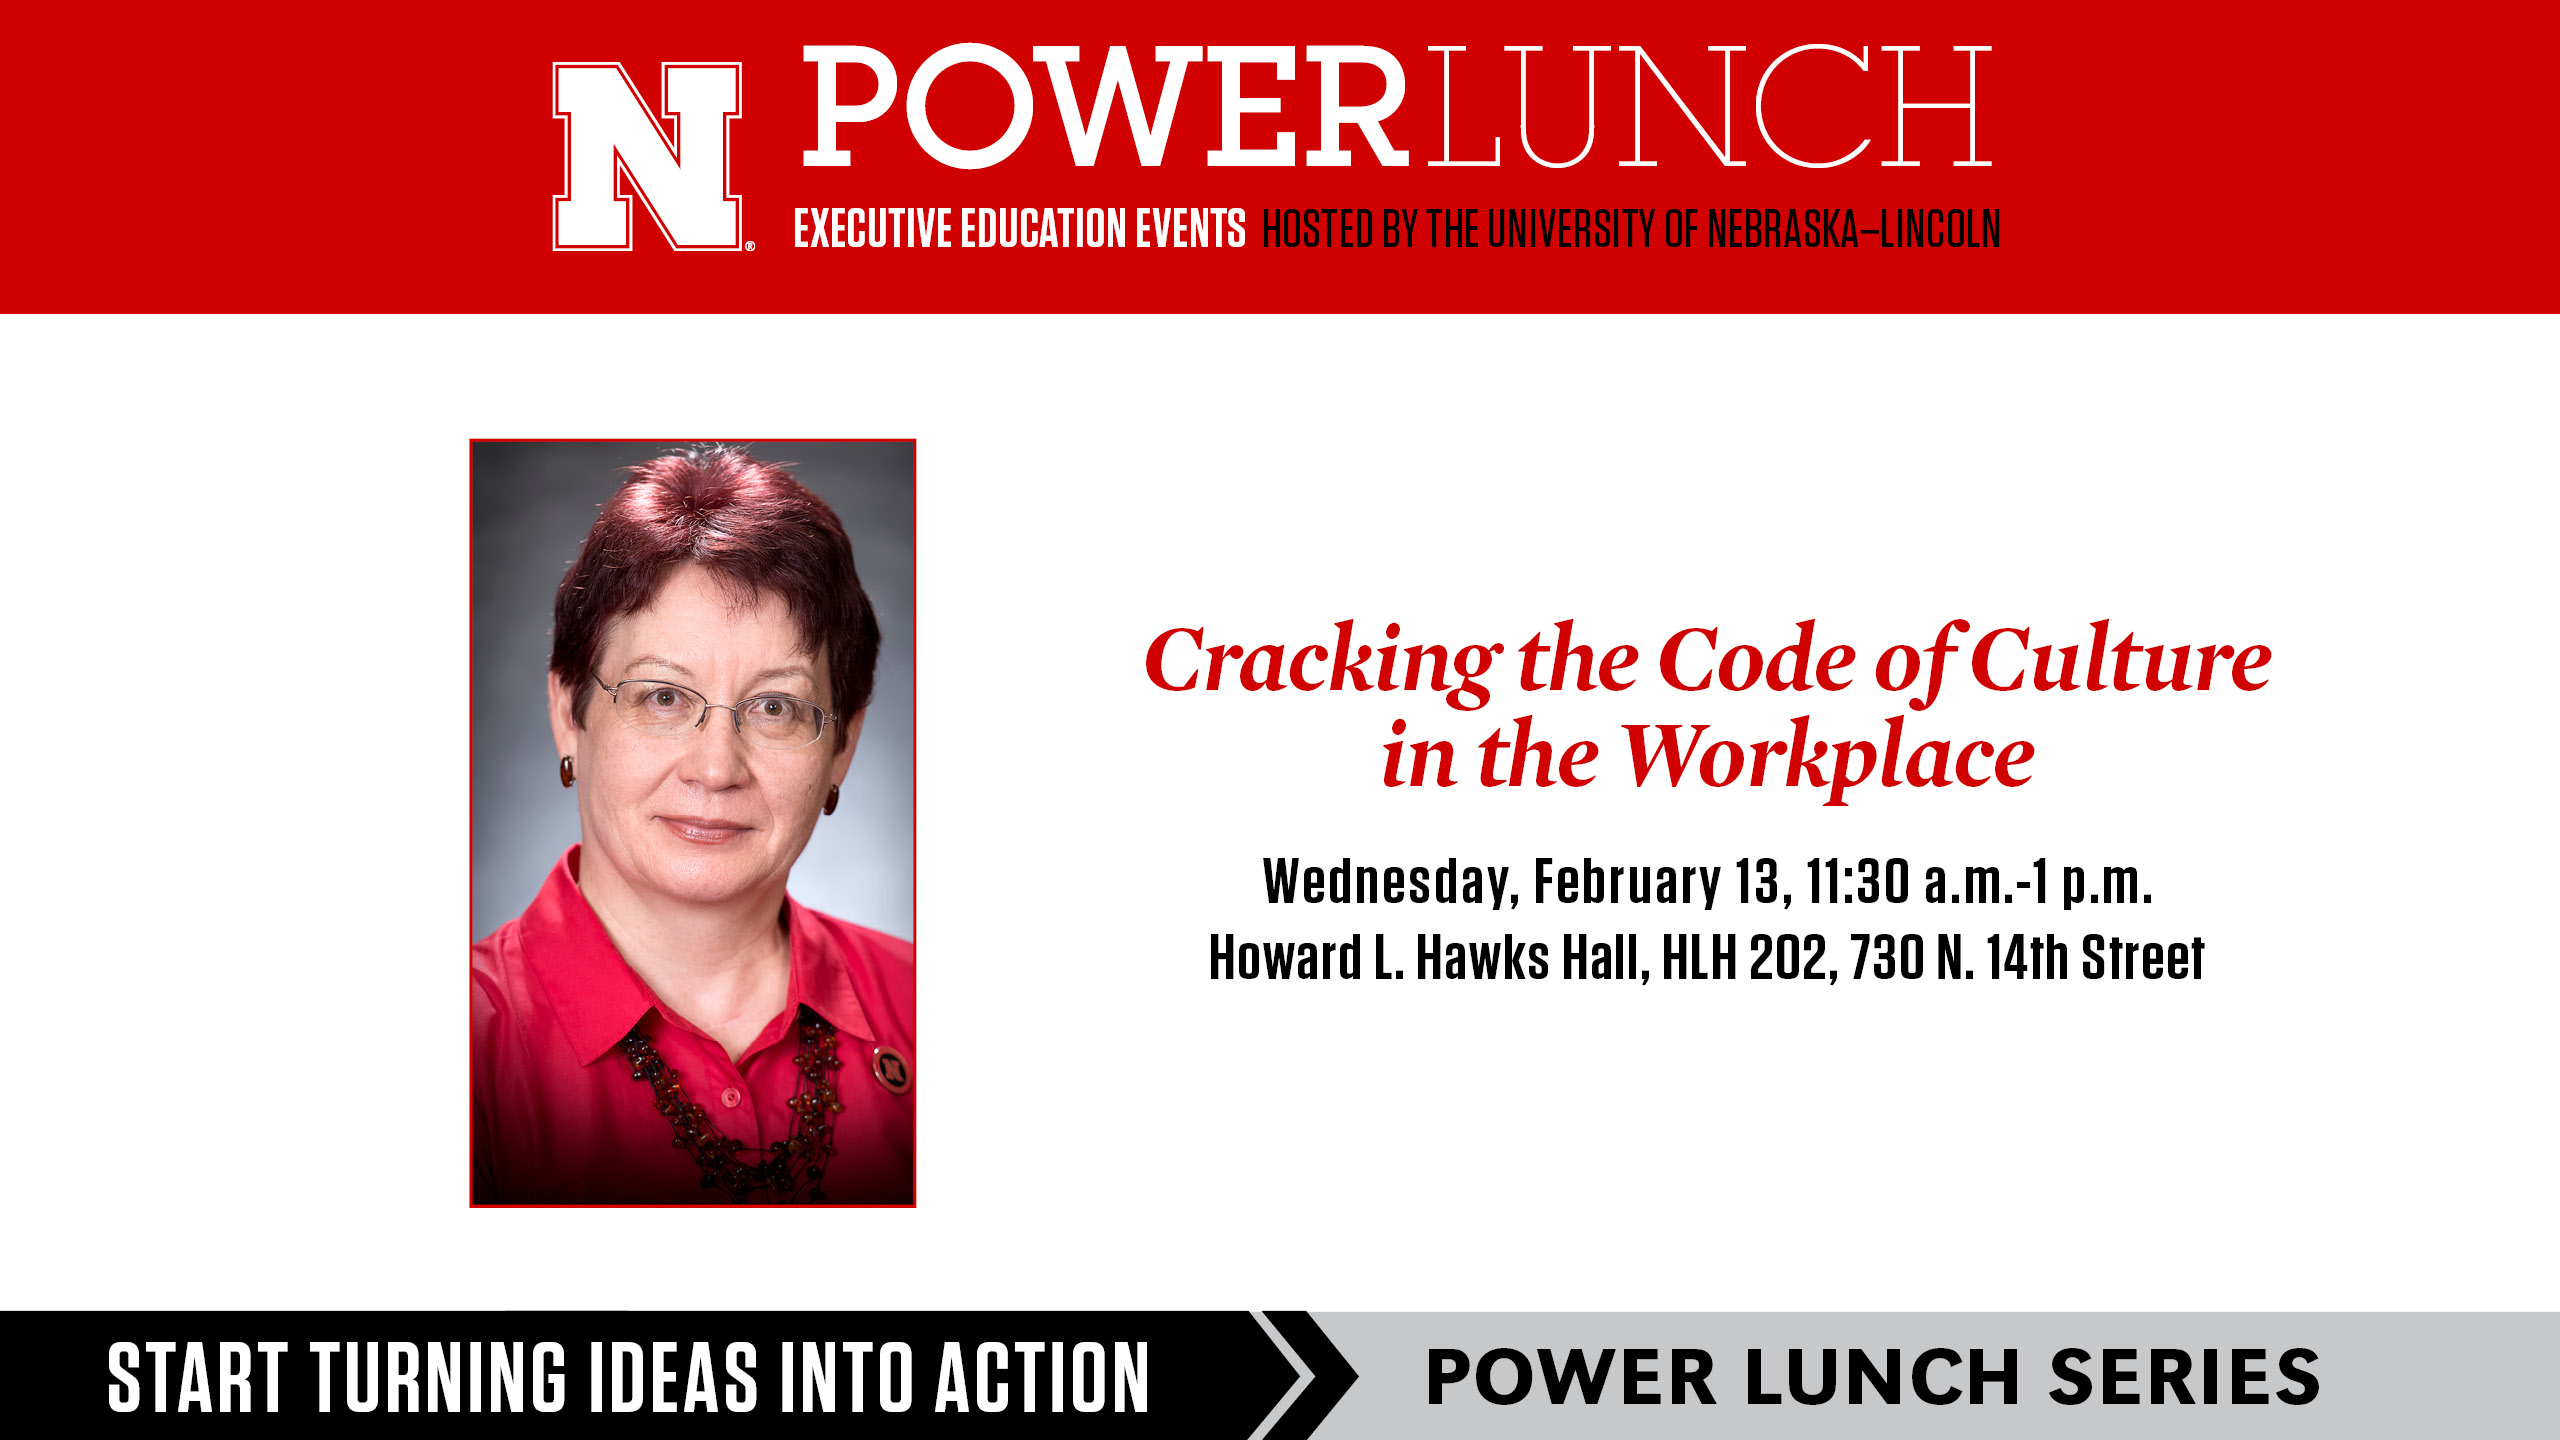 Power Lunch, February 19 in HLH 202